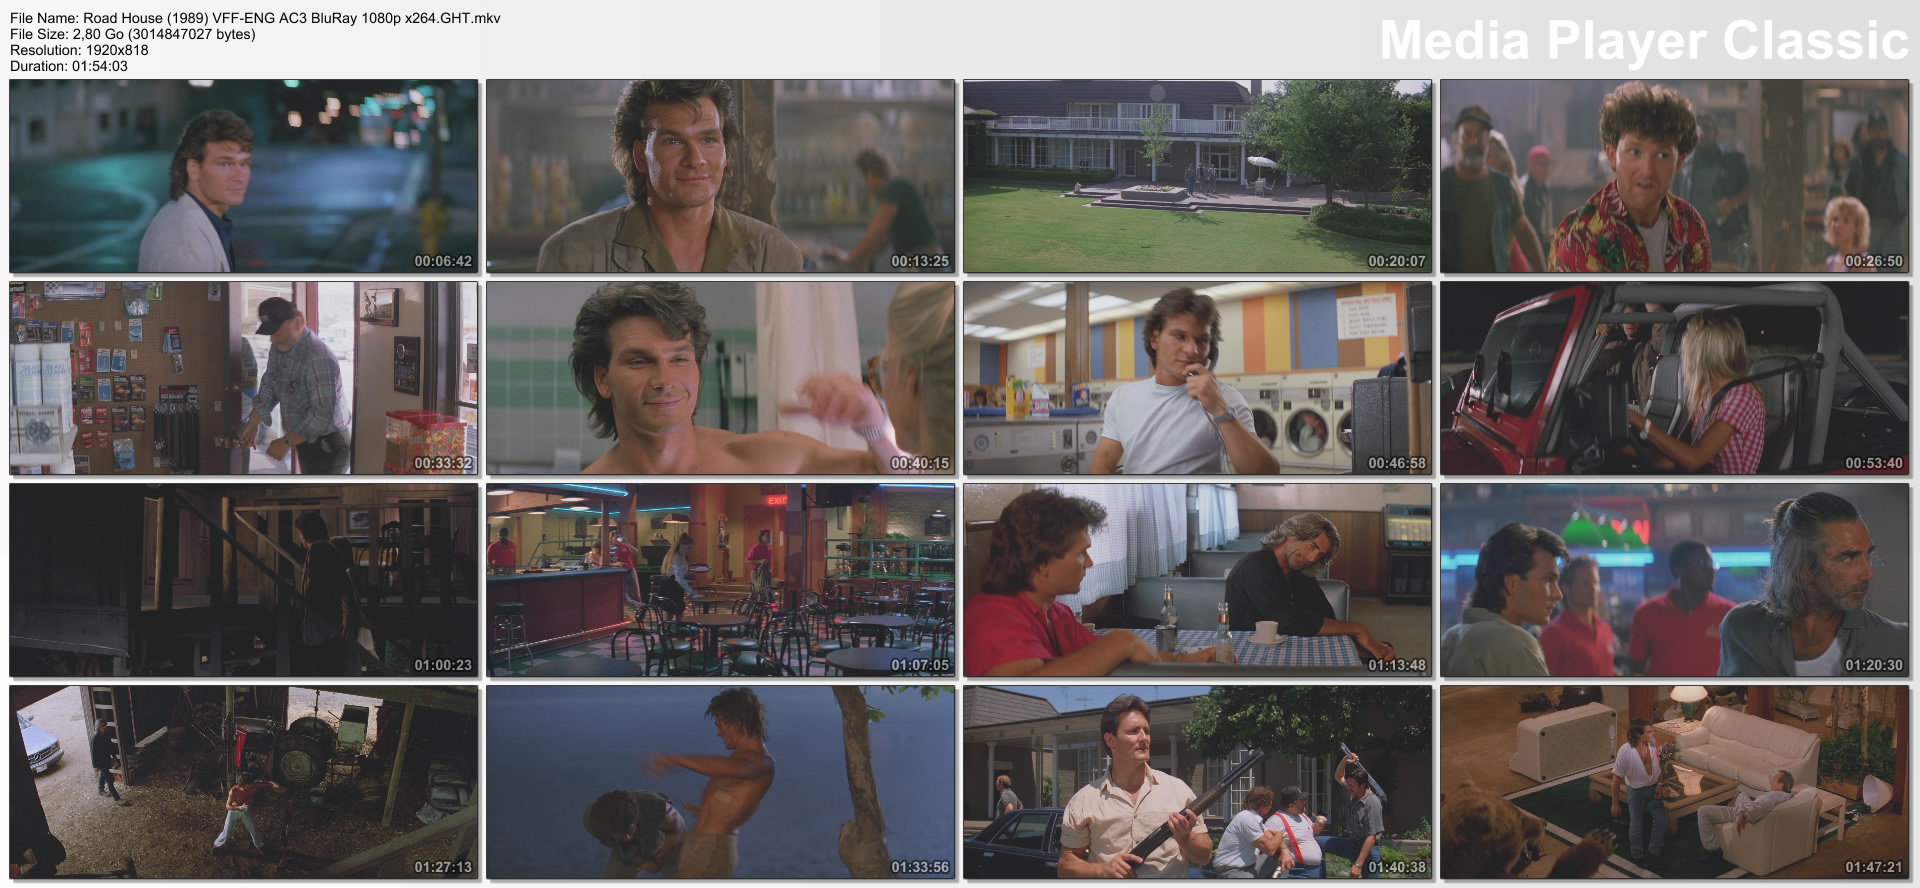 Road House (1989) VFF-ENG AC3 BluRay 1080p x264.GHT